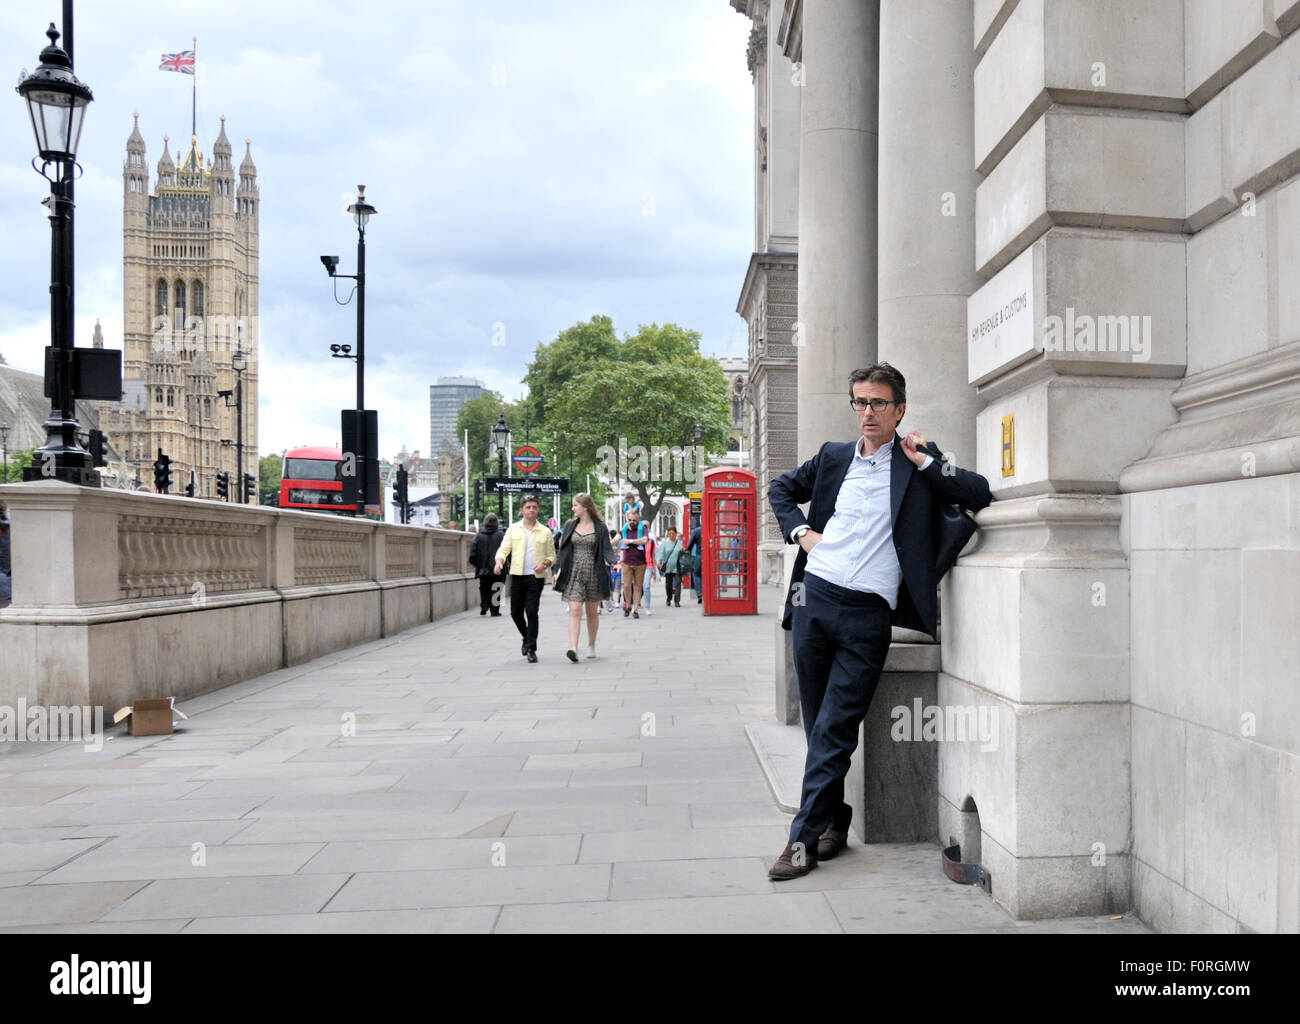 London, England, UK. Robert Peston - Political Editor of ITV News - at H M Revenue and Customs building in Whitehall, Westminster Stock Photo